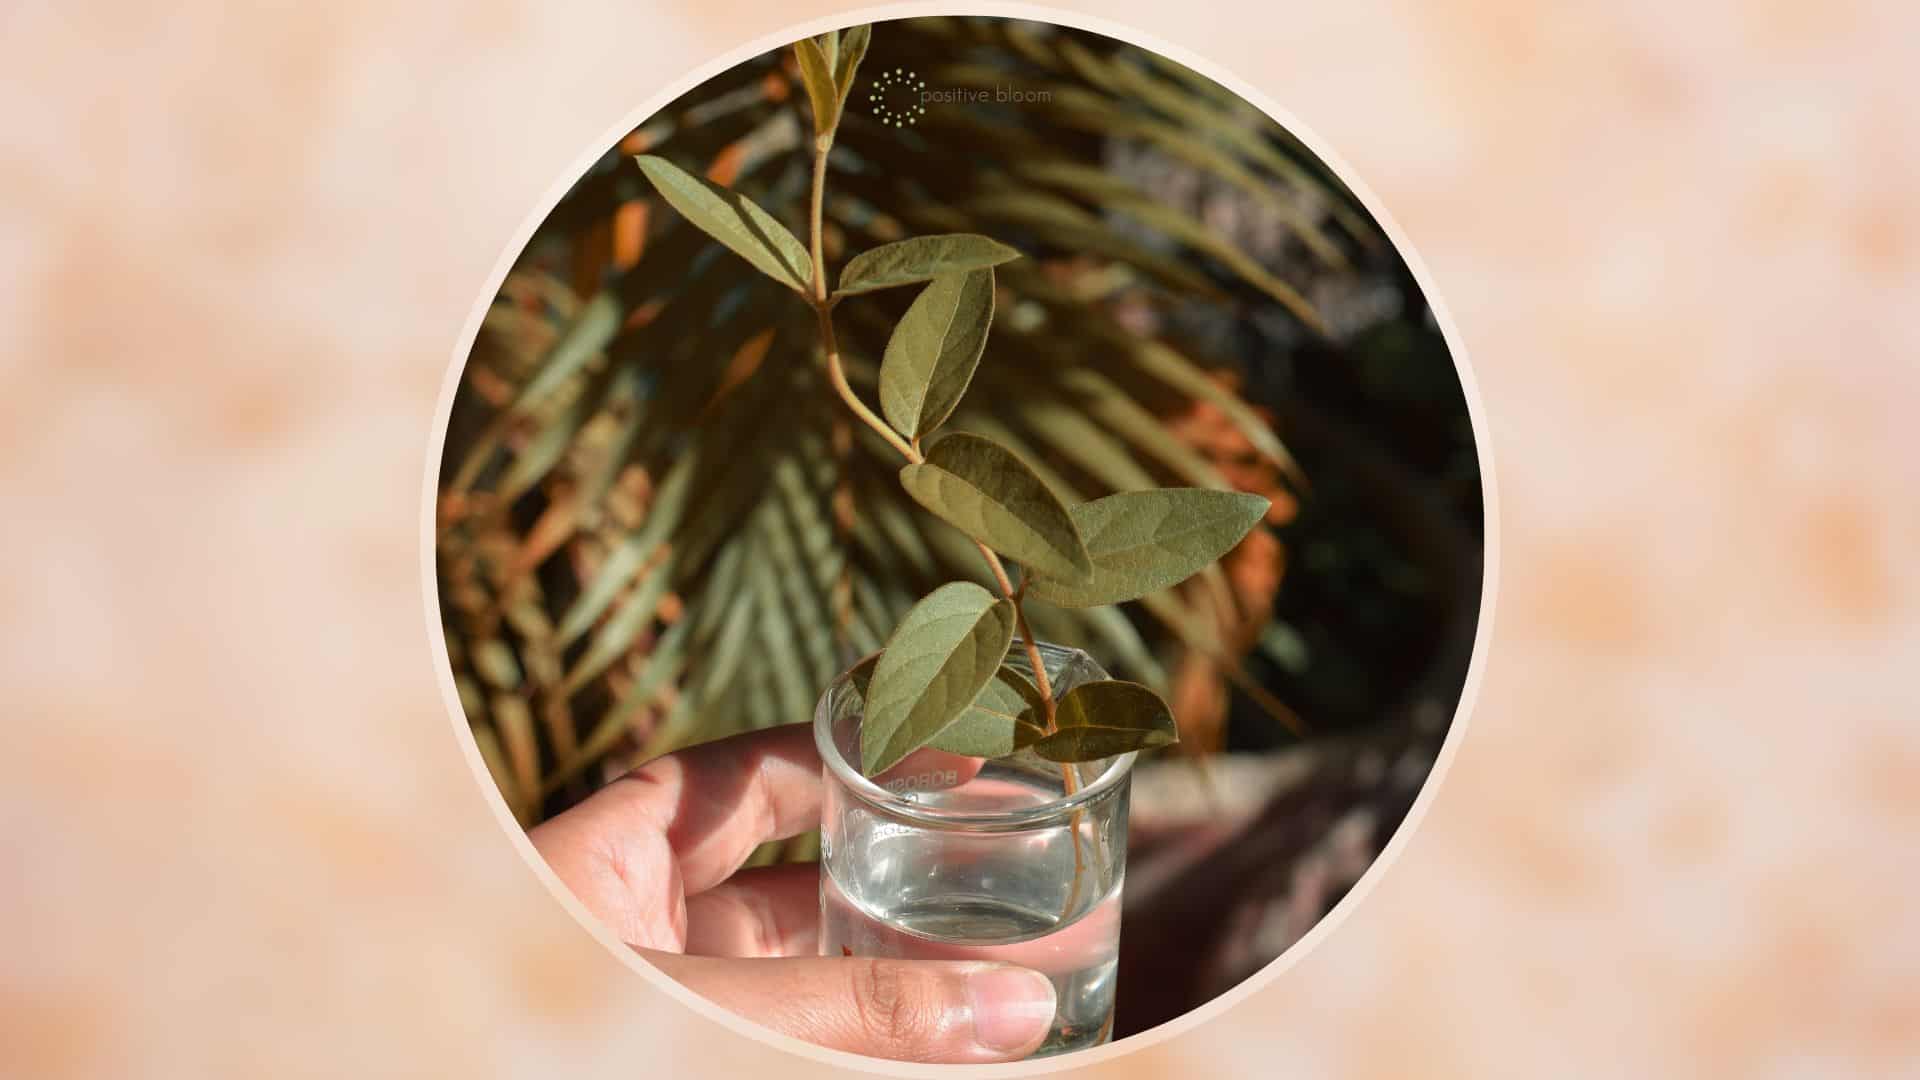 plant in a glass jar